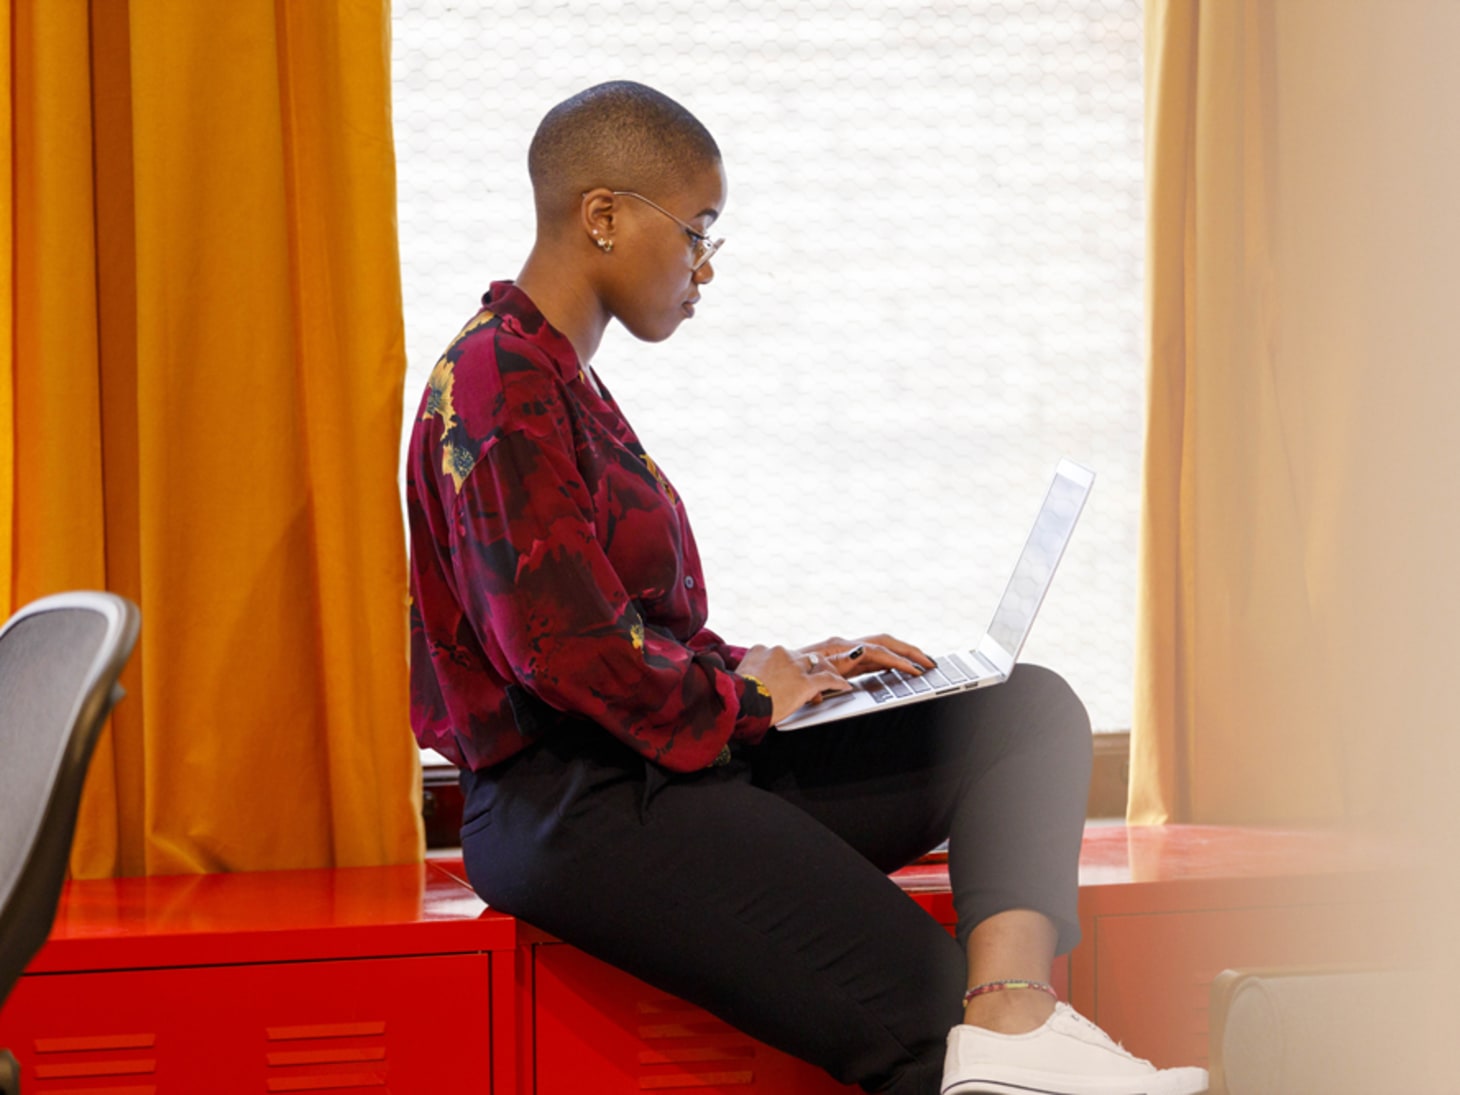 Black woman working at laptop in window sill